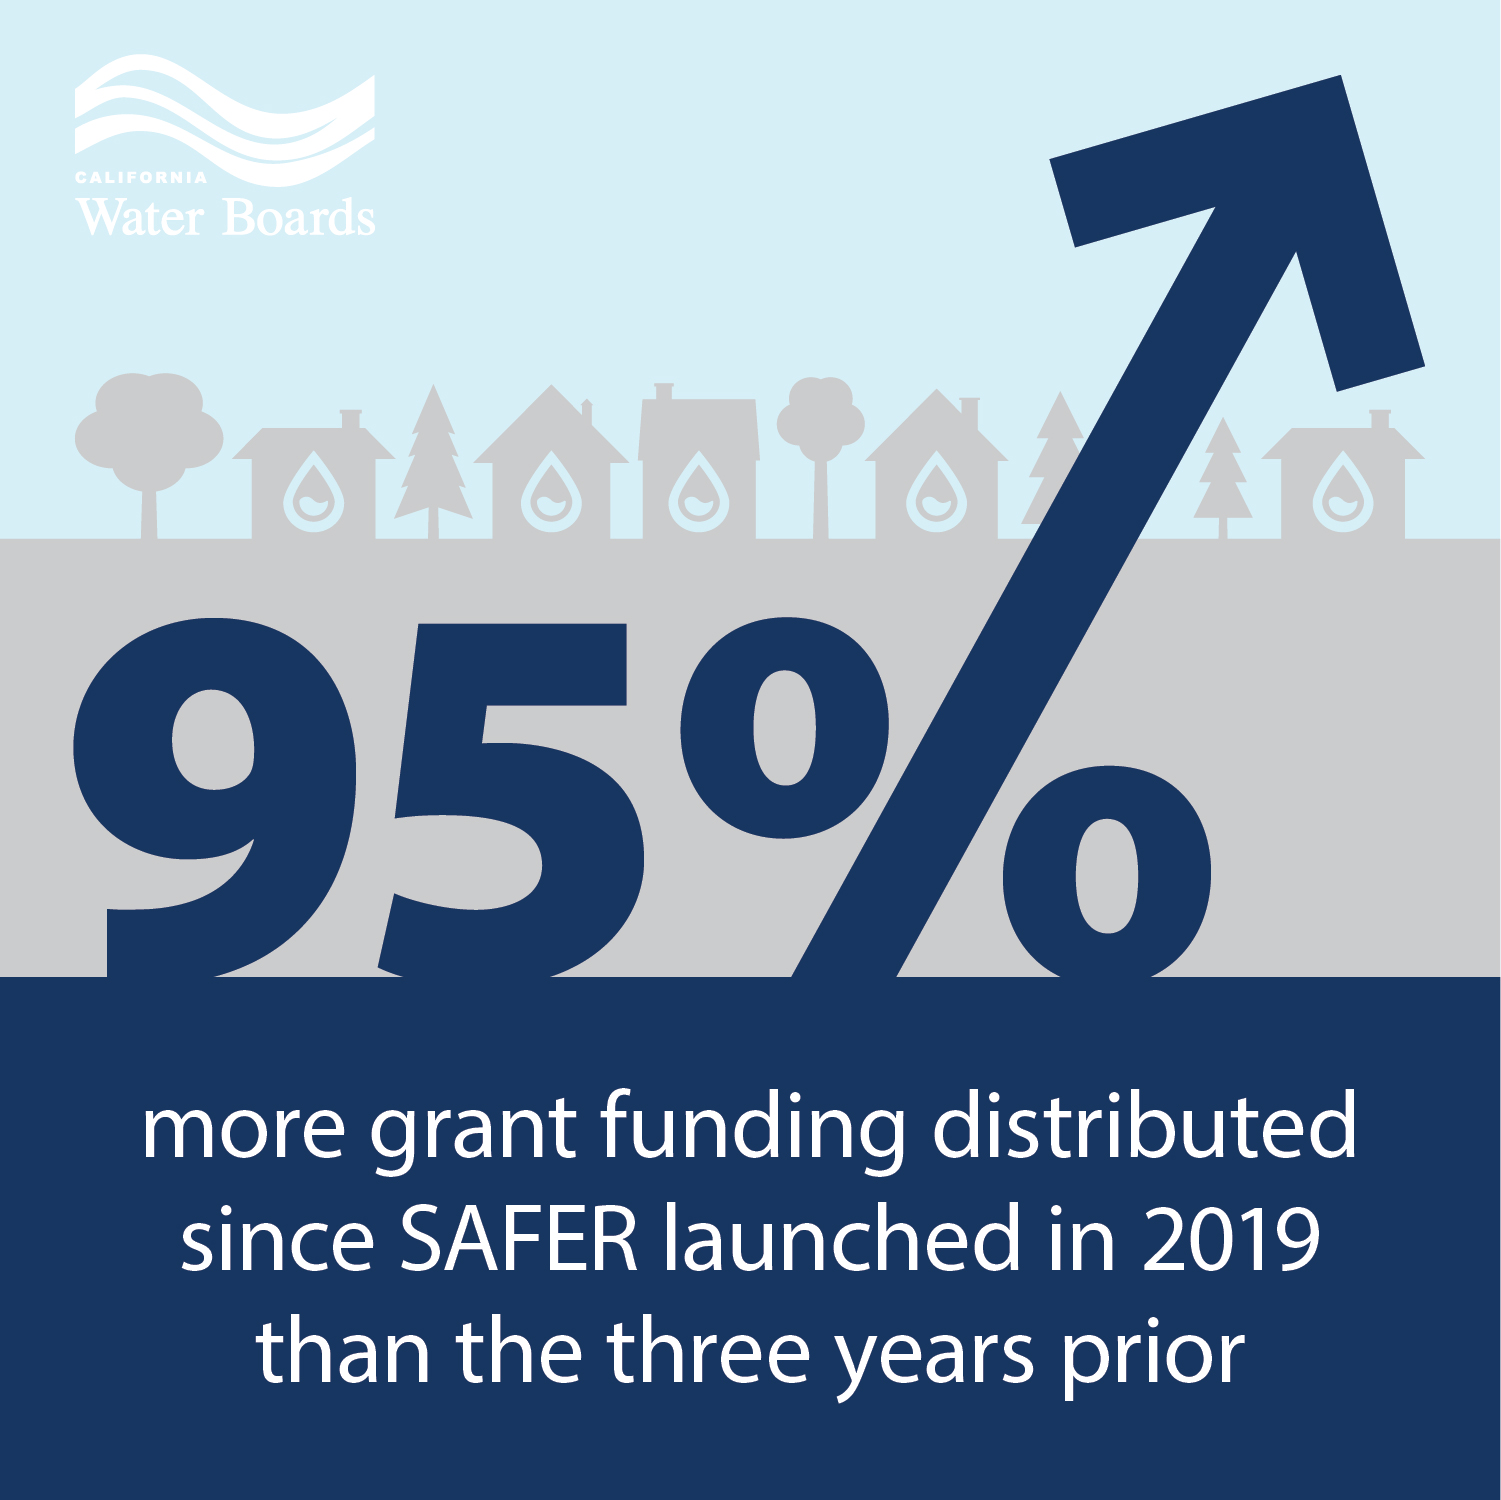 95 percent more grant funding distributed under SAFER